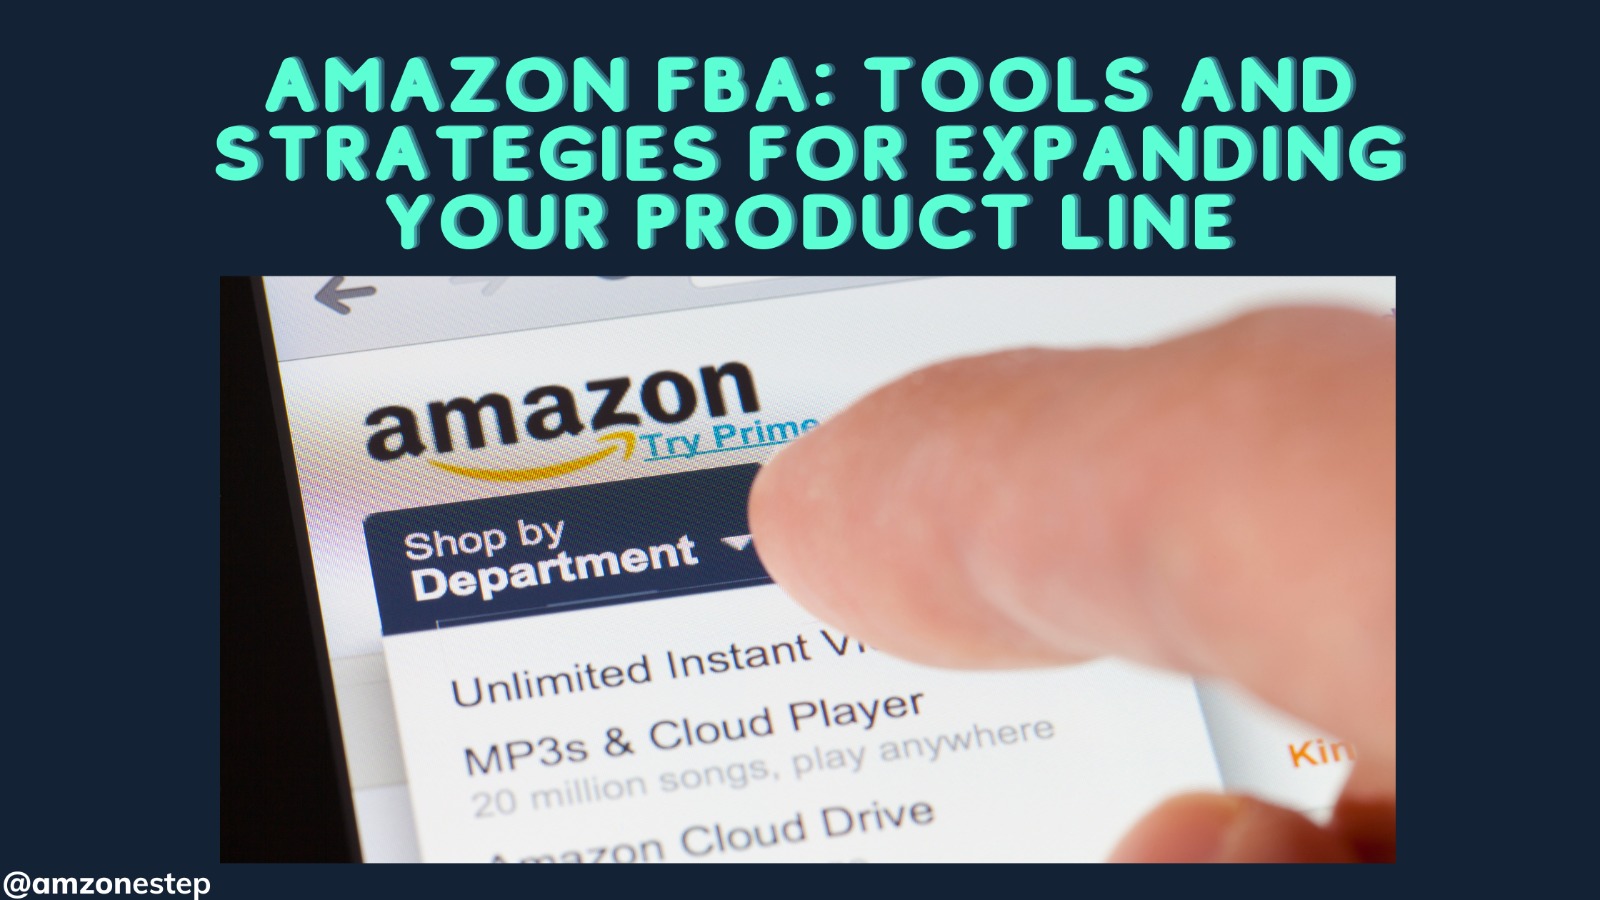 Amazon FBA: Tools and Strategies for Expanding Your Product Line